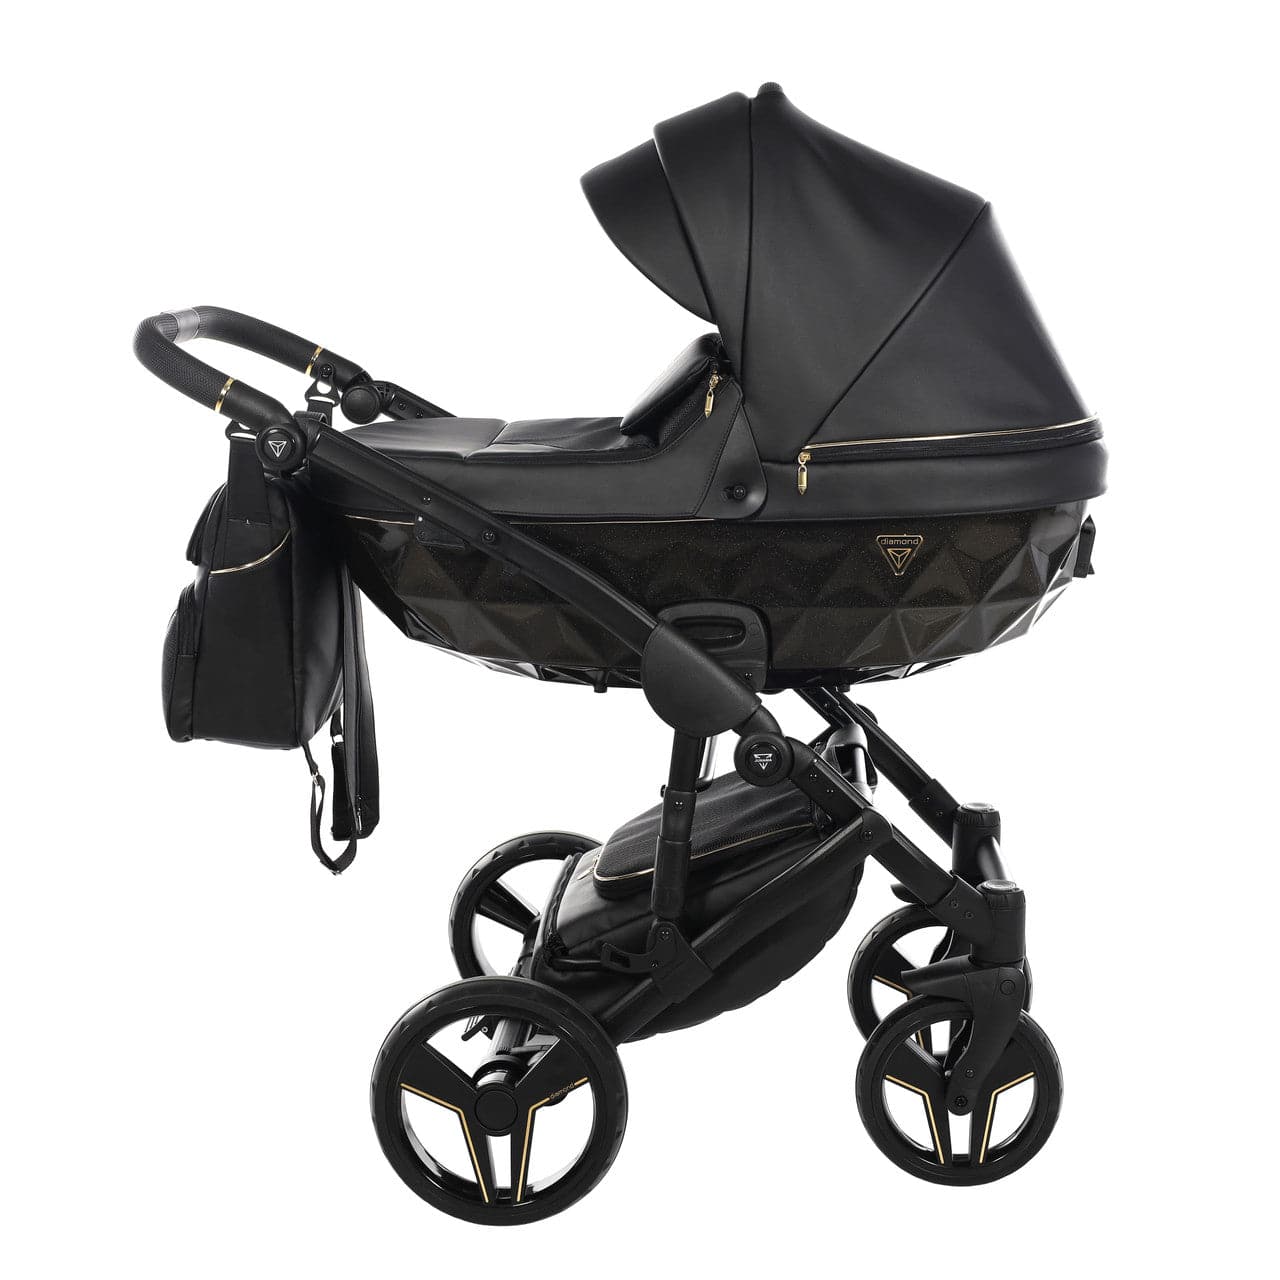 Junama S-Class 2 In 1 Pram - Black - For Your Little One